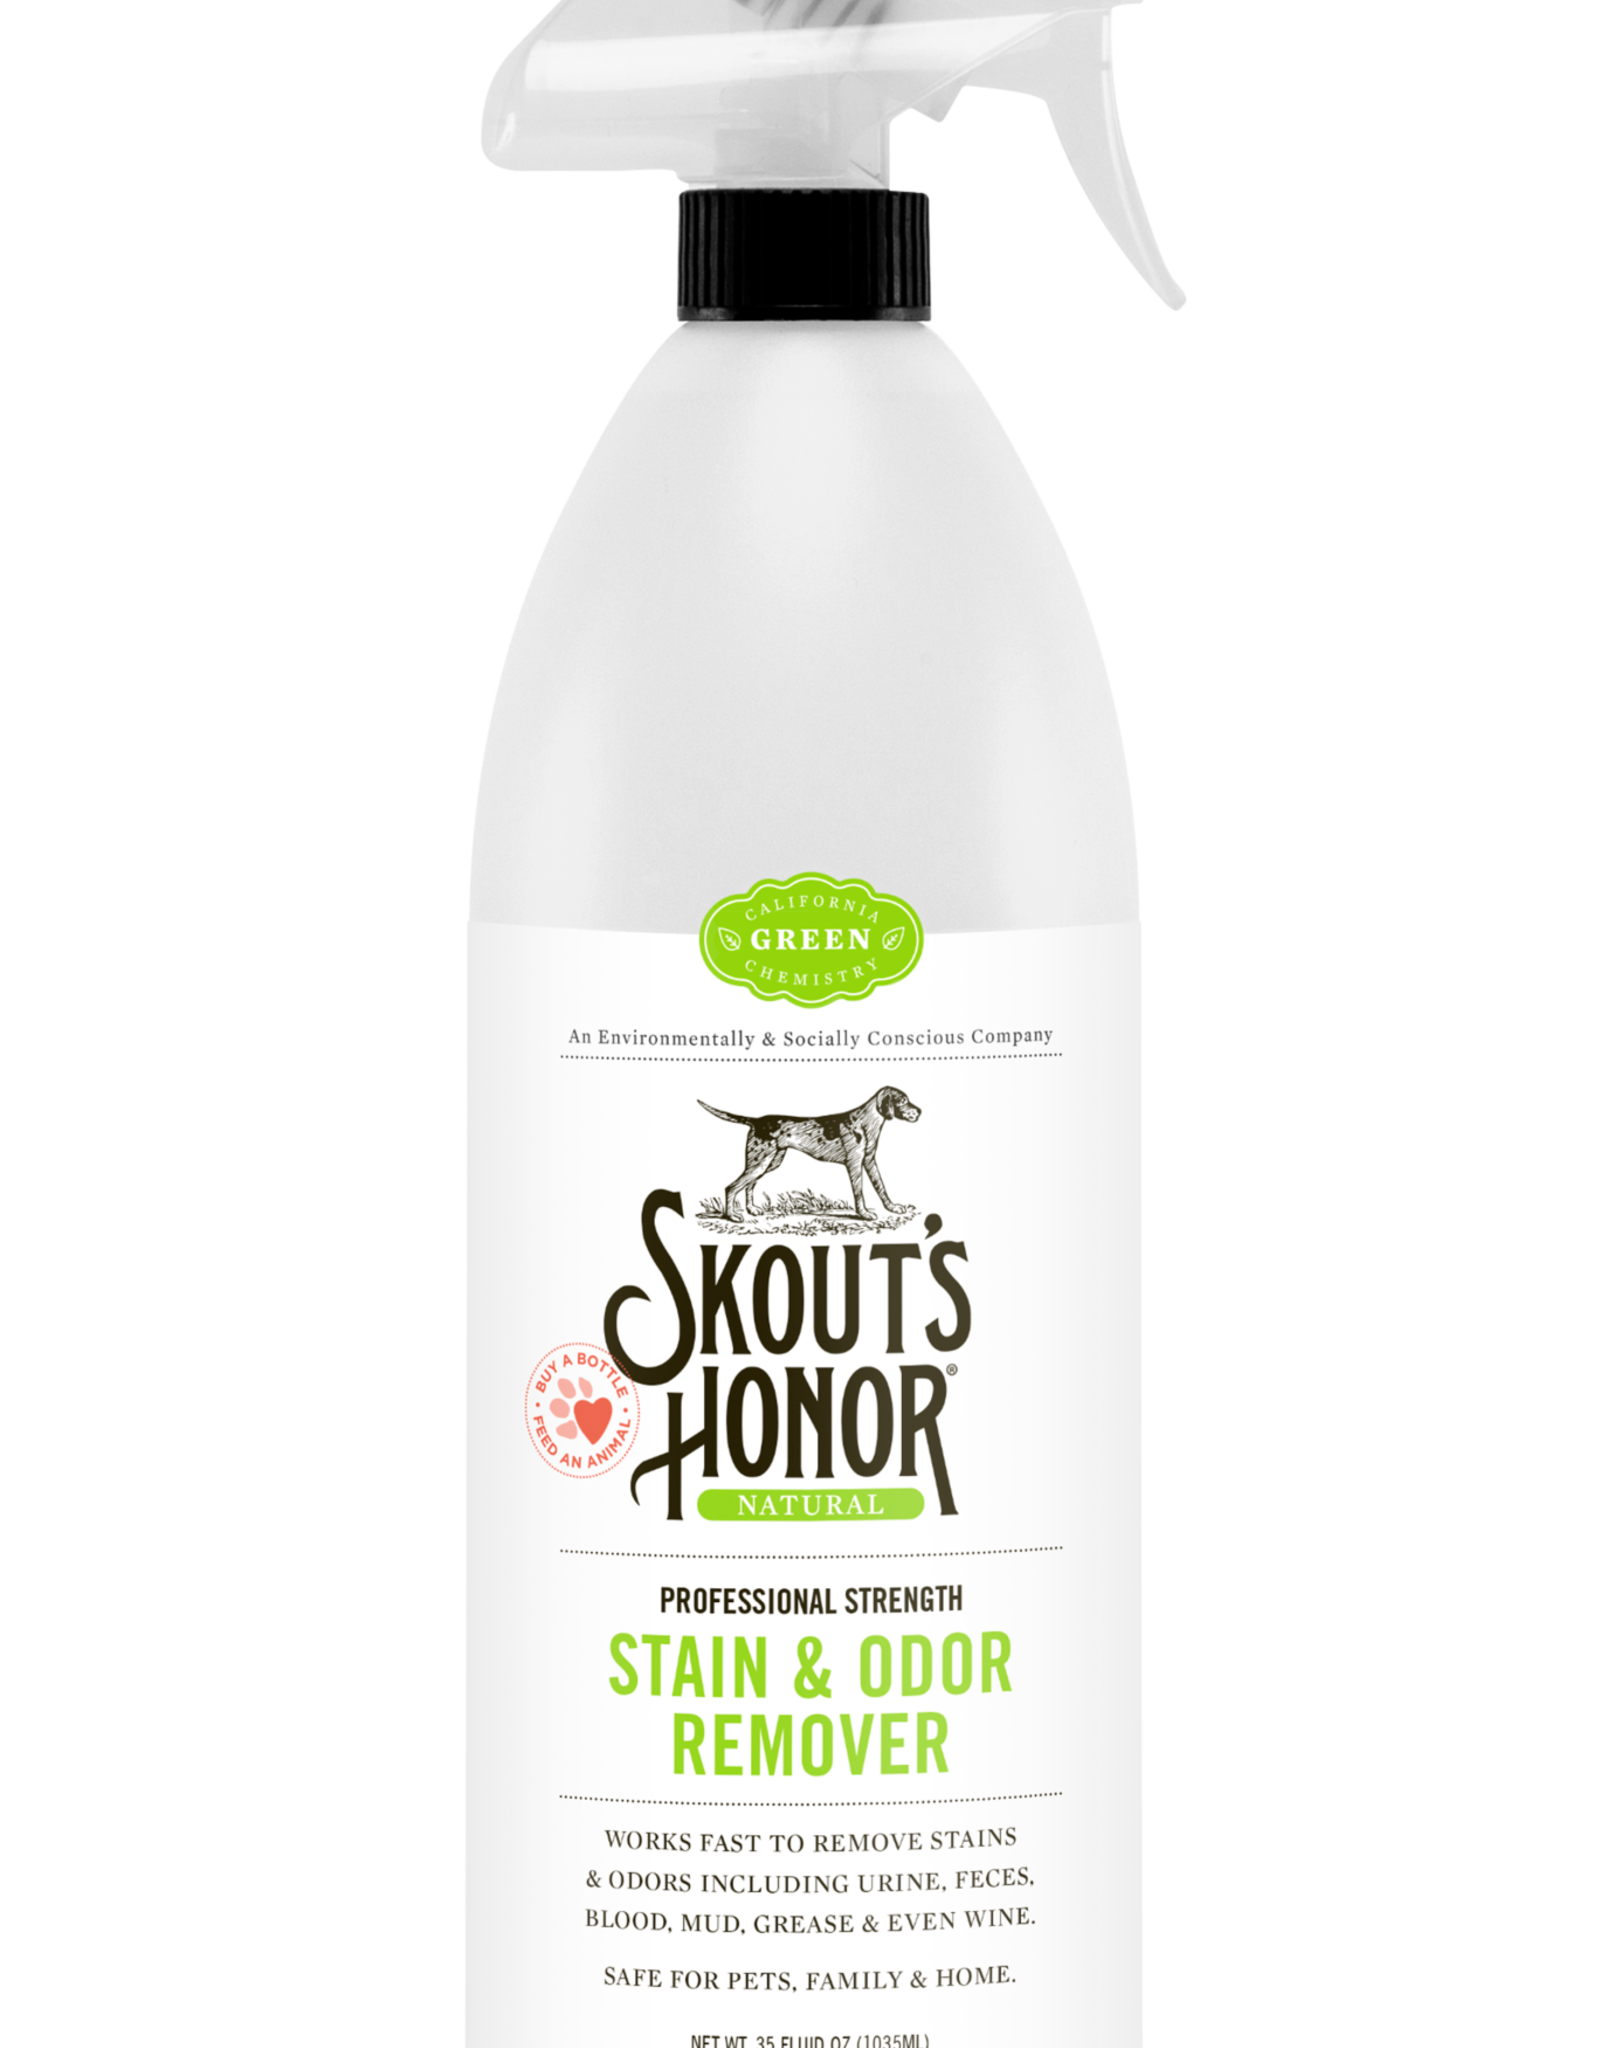 SKOUTS HONOR Skout's Honor Professional Strength Stain & Odor Remover 35 oz